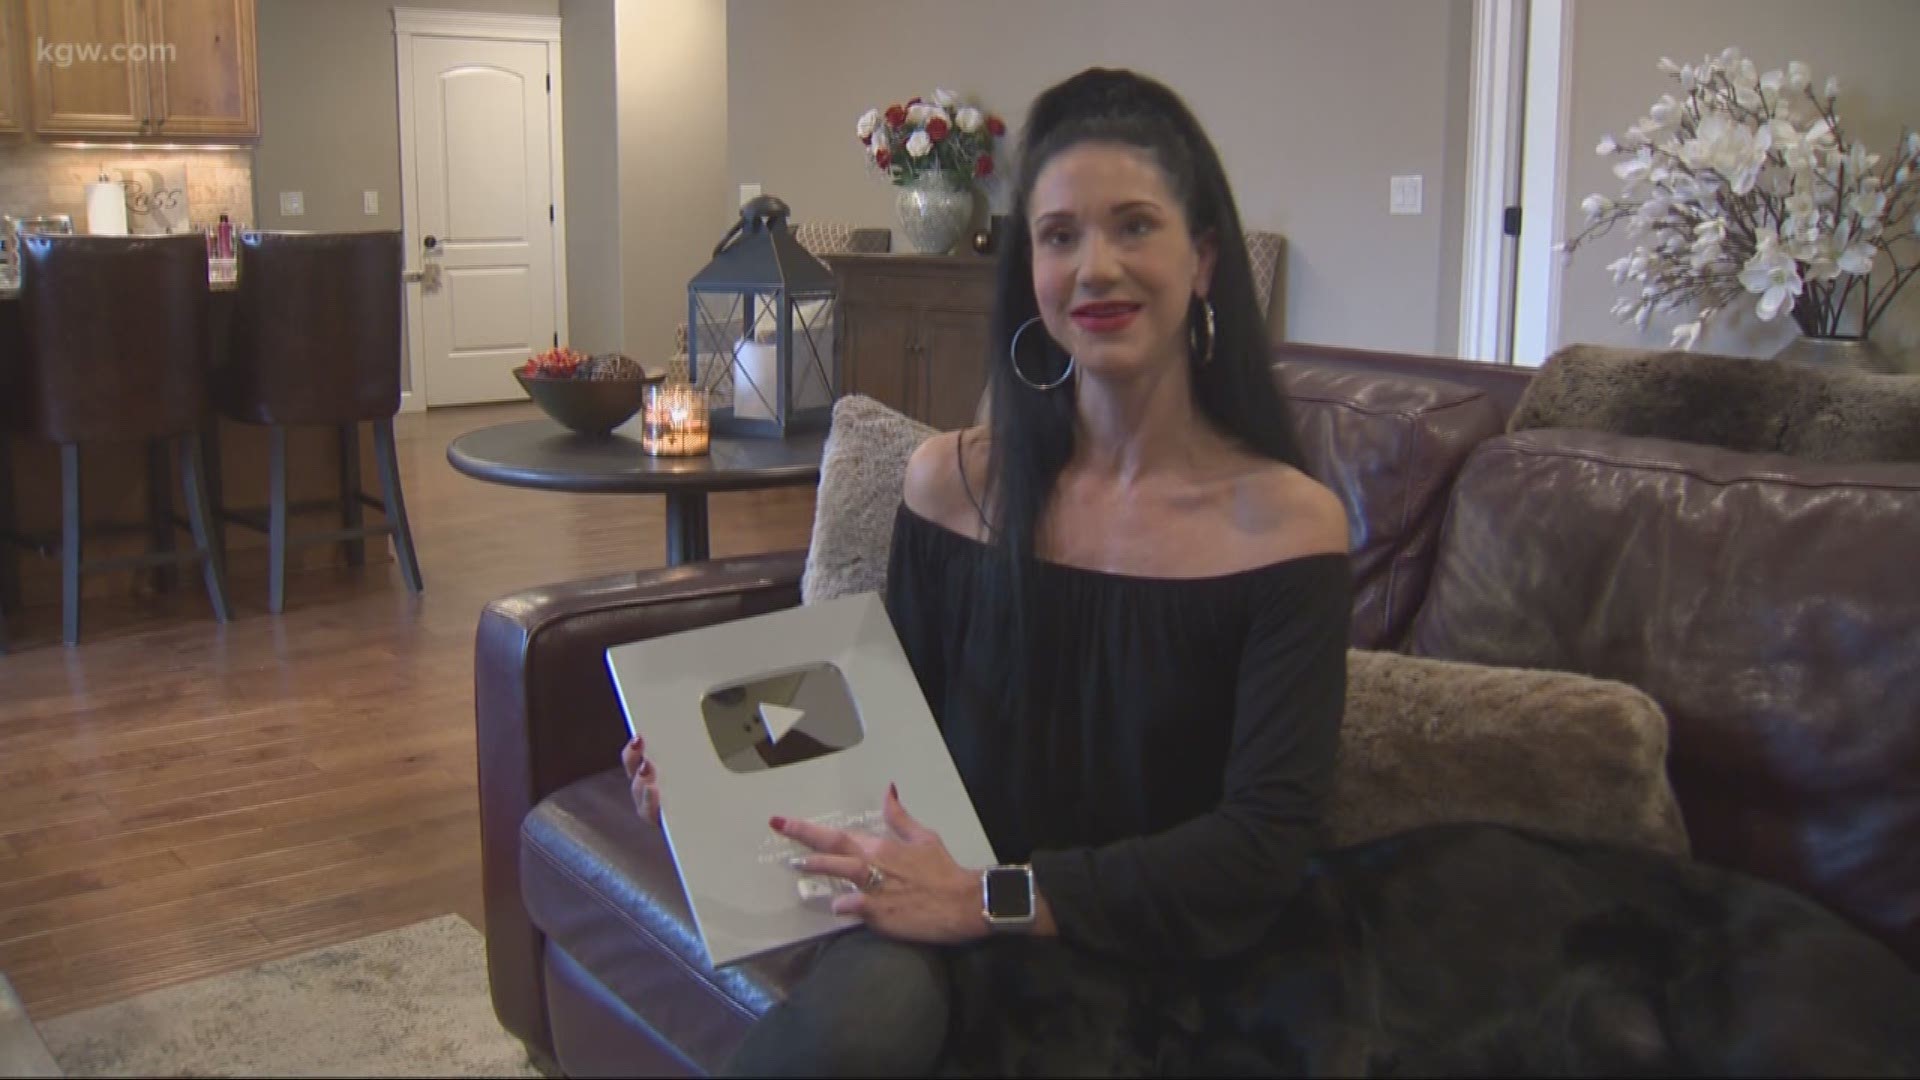 Joy Ross has been sharing videos of what it's like be blind. Her channel has been so popular that she earned an award from YouTube.